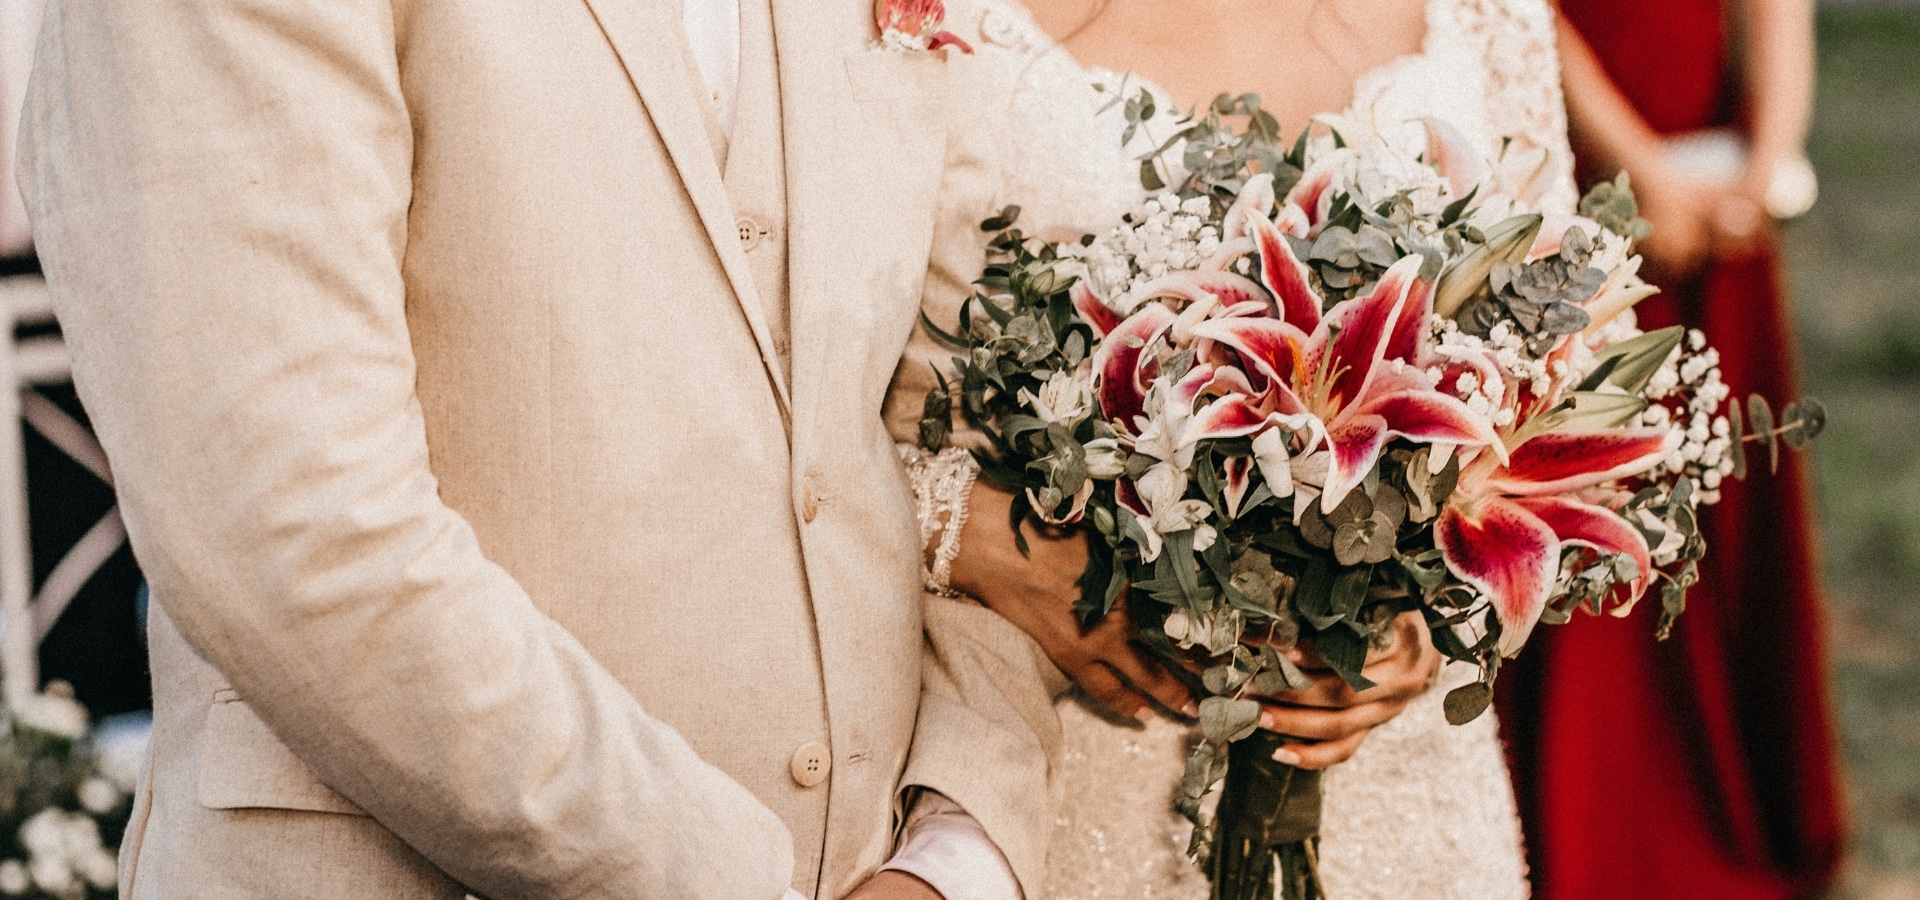 Hero image for 14 Different Wedding Bouquet Styles That You’re Sure To Love